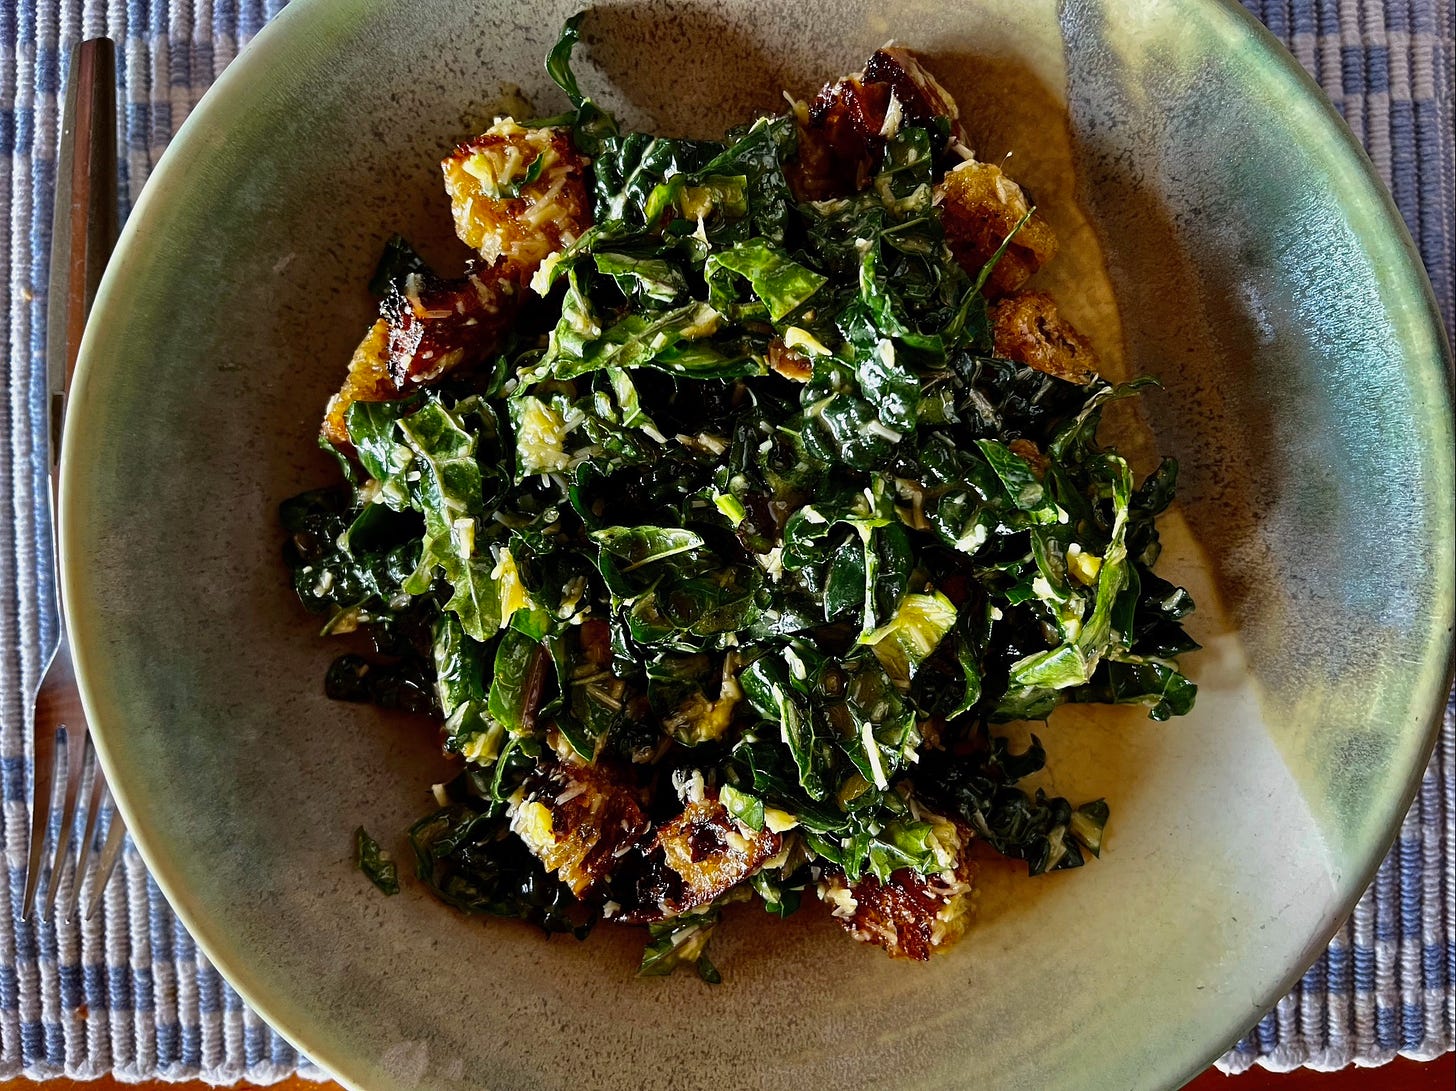 A green and white ceramic bowl of kale Caesar salad: roughly chopped bright green leaves and croutons, with lots of pressed garlic and Parmesan visible on top.